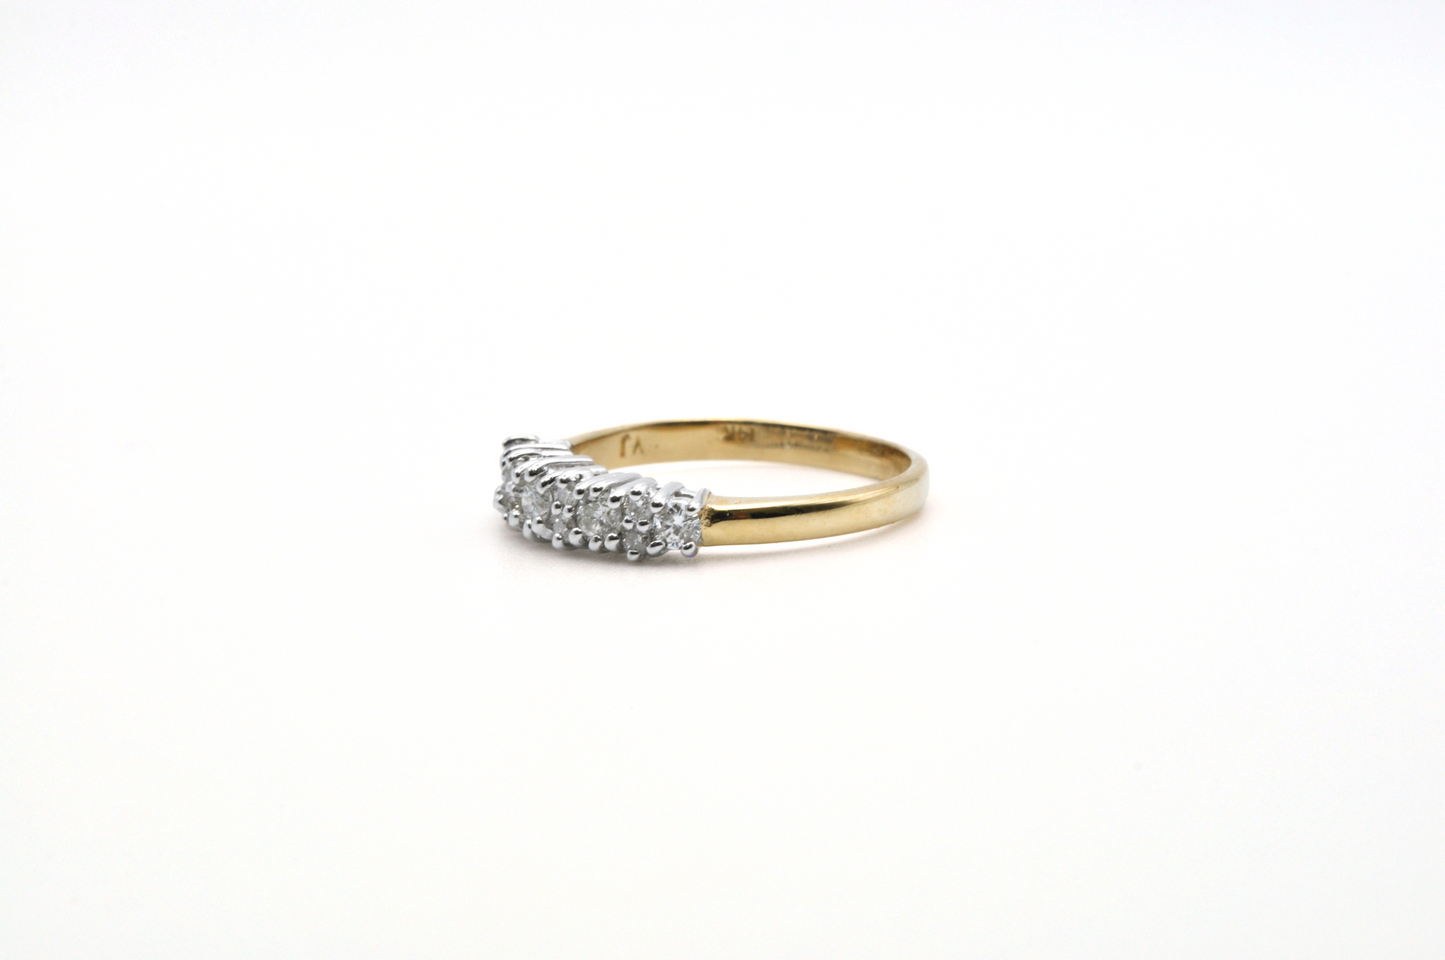 Yellow Gold Ring With a Row of Round Diamonds